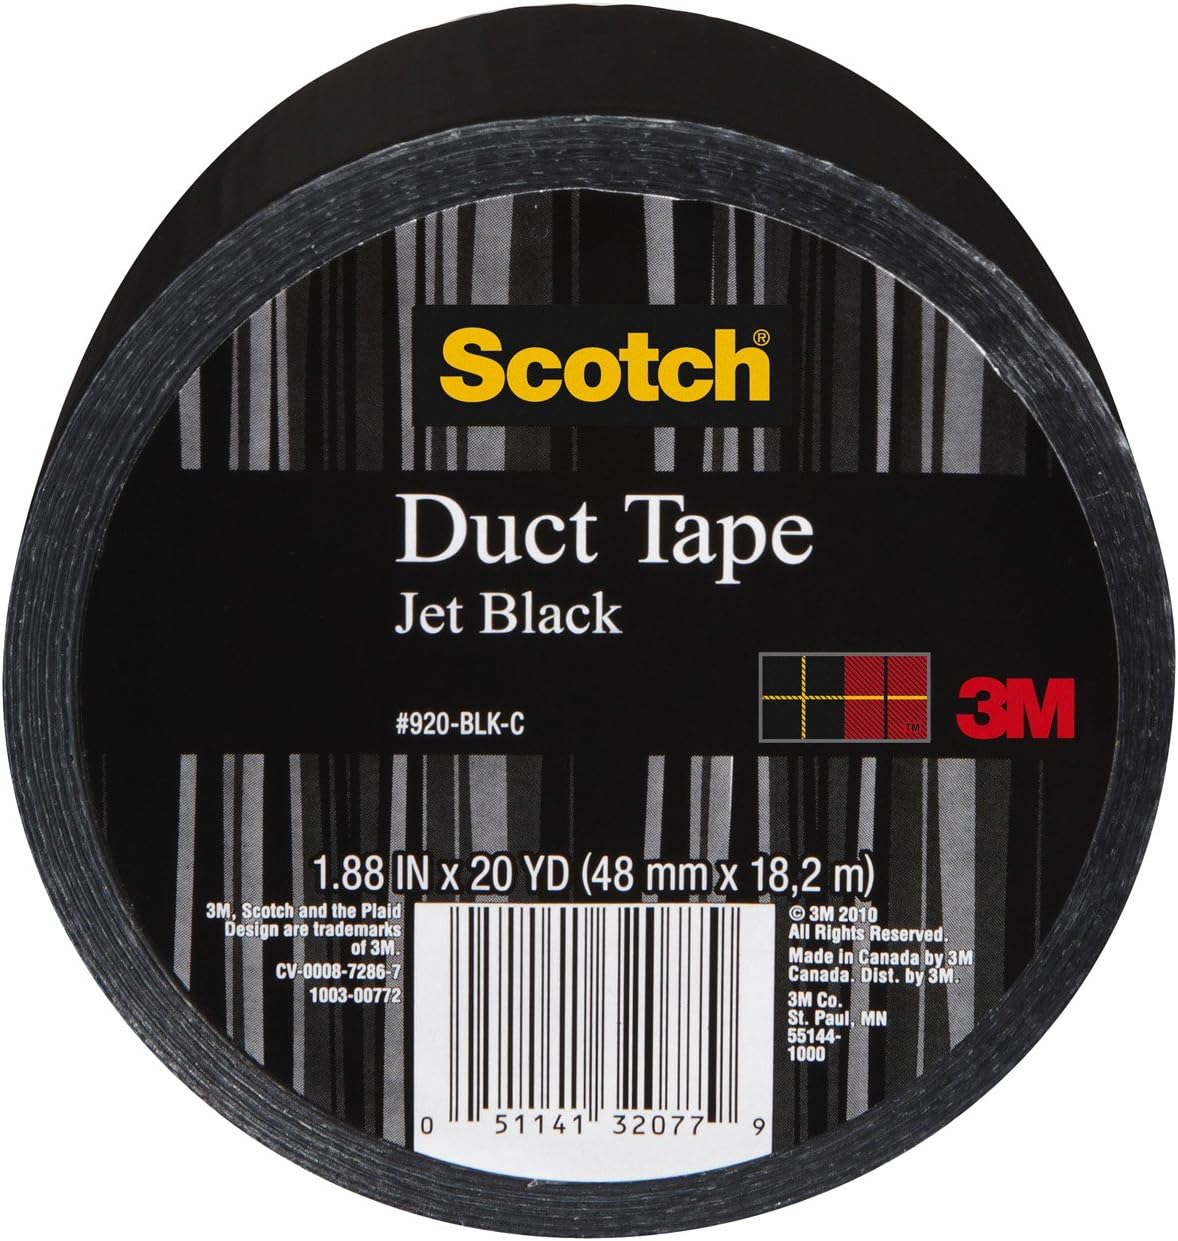 Scotch Duct Tape, Jet Black, 1.88-Inch by 20-Yard, 6-Pack $9.85 w/ Amazon Free Prime Shipping or Subscribe & Save